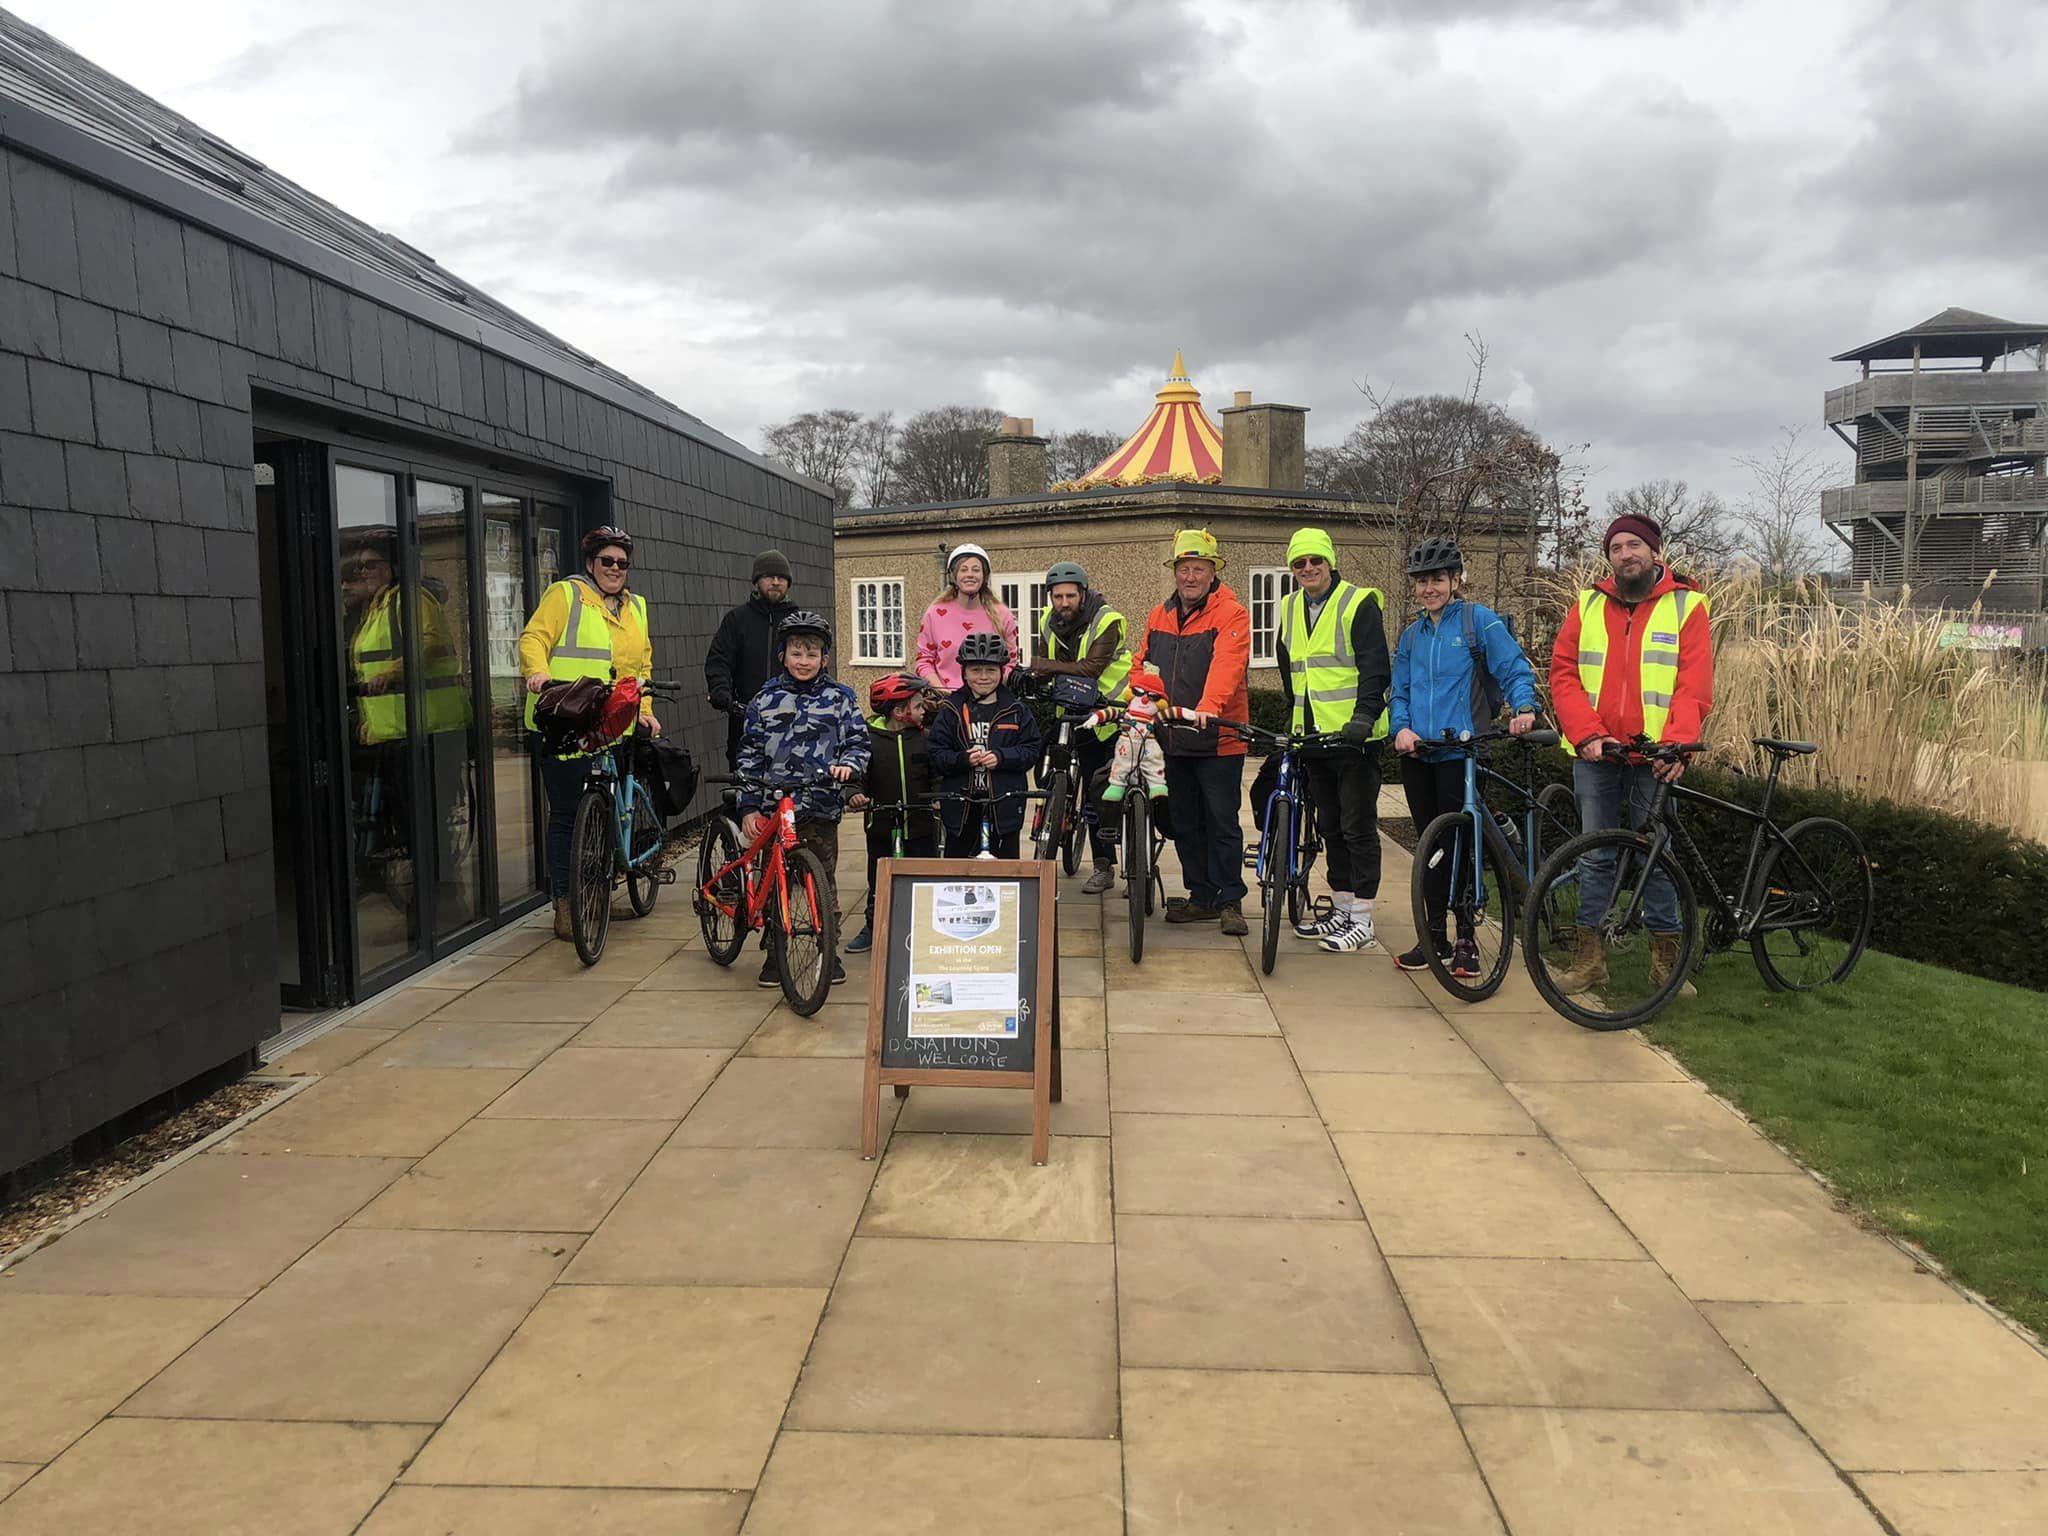 Group of cyclists in High Vis outside a cafe in a park